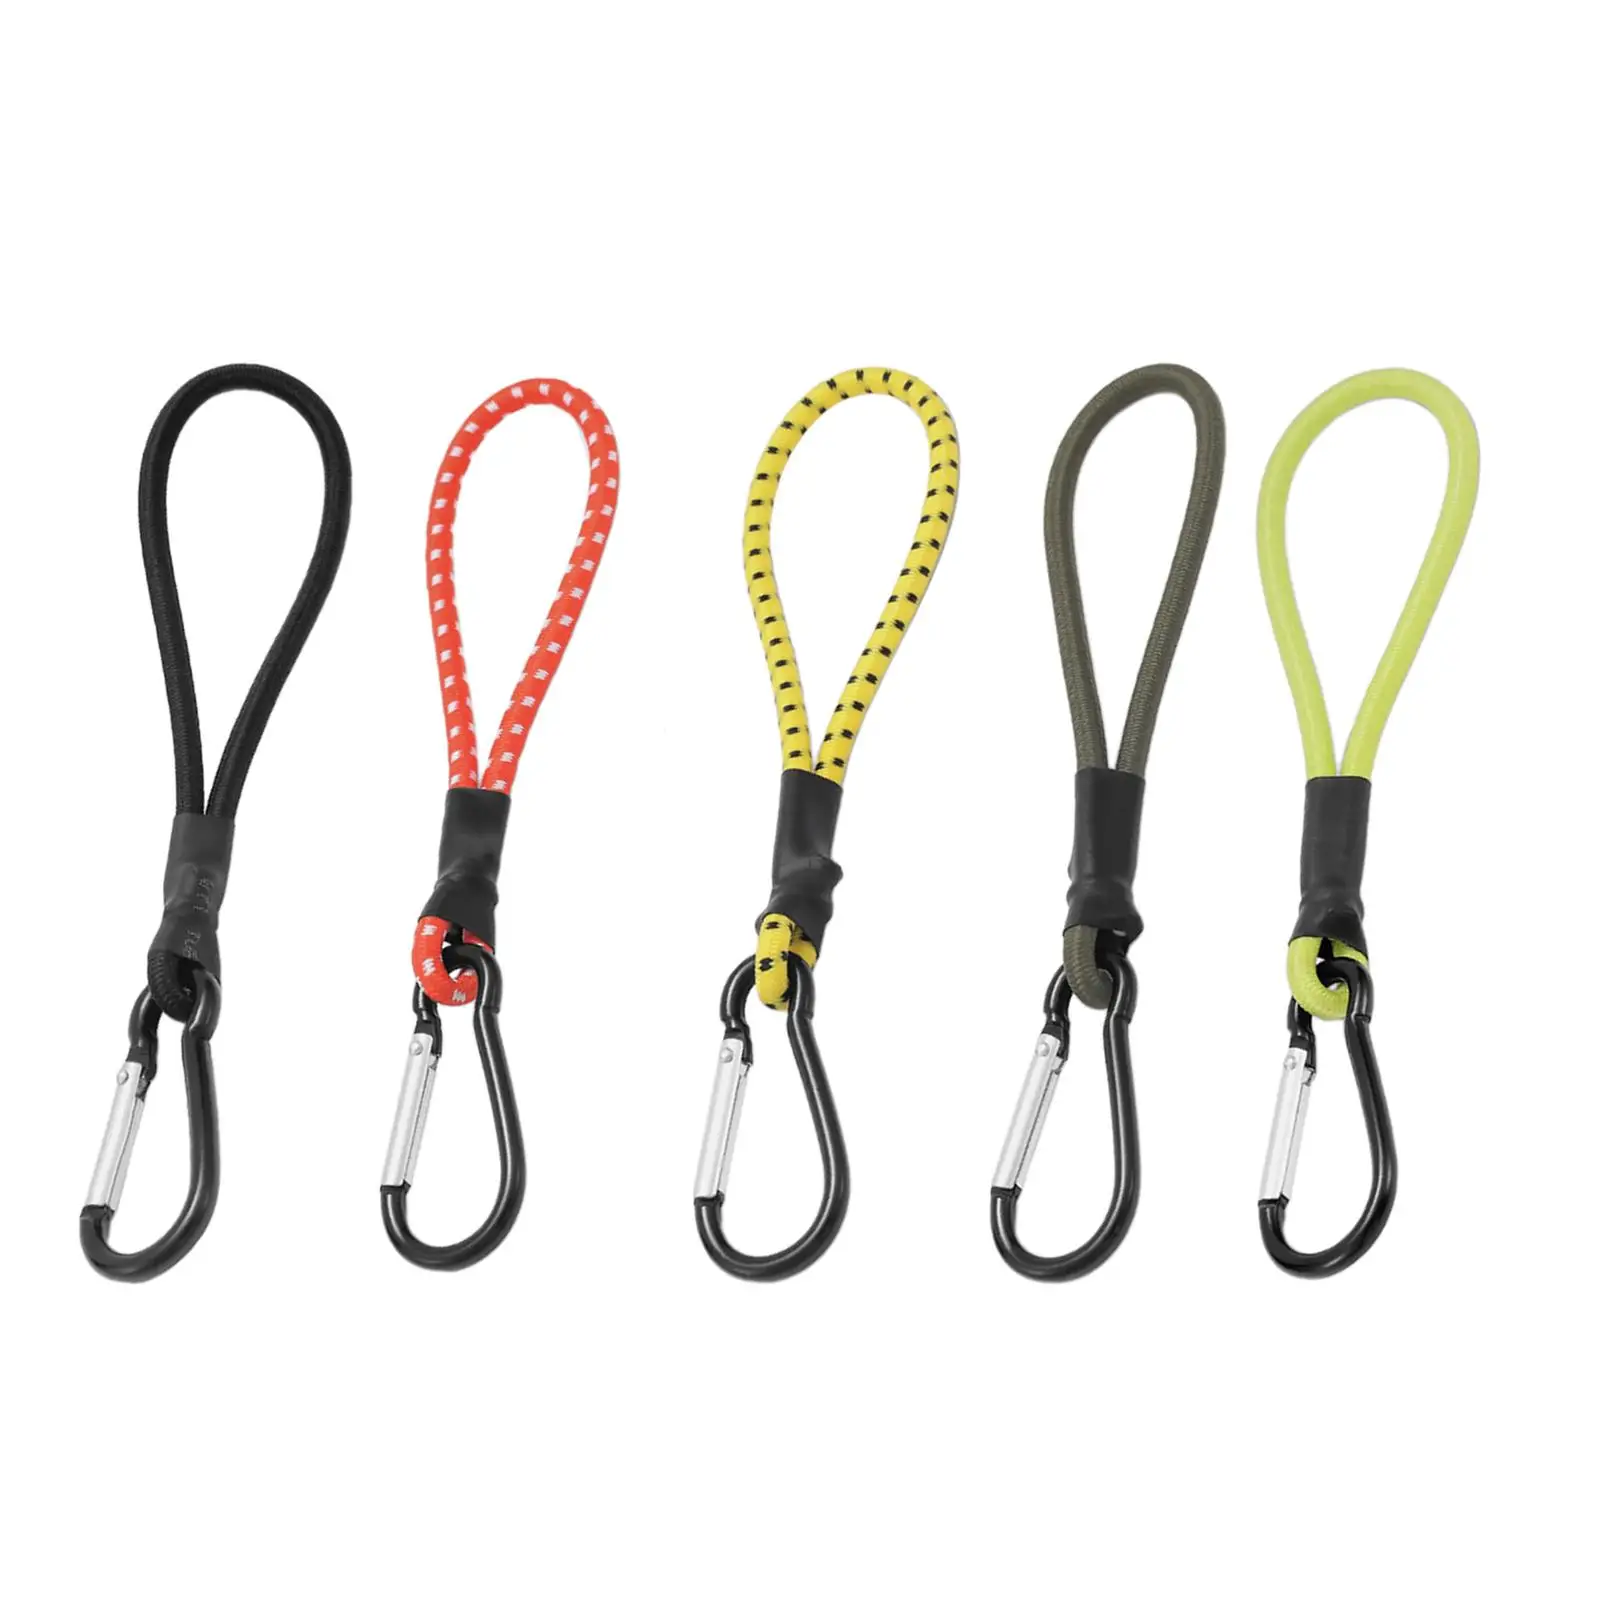 Bungee Cord with Carabiner, Elastic Rope Buckle Hook, Heavy Duty Durable Elastic Tent Cord for Outdoor Camping